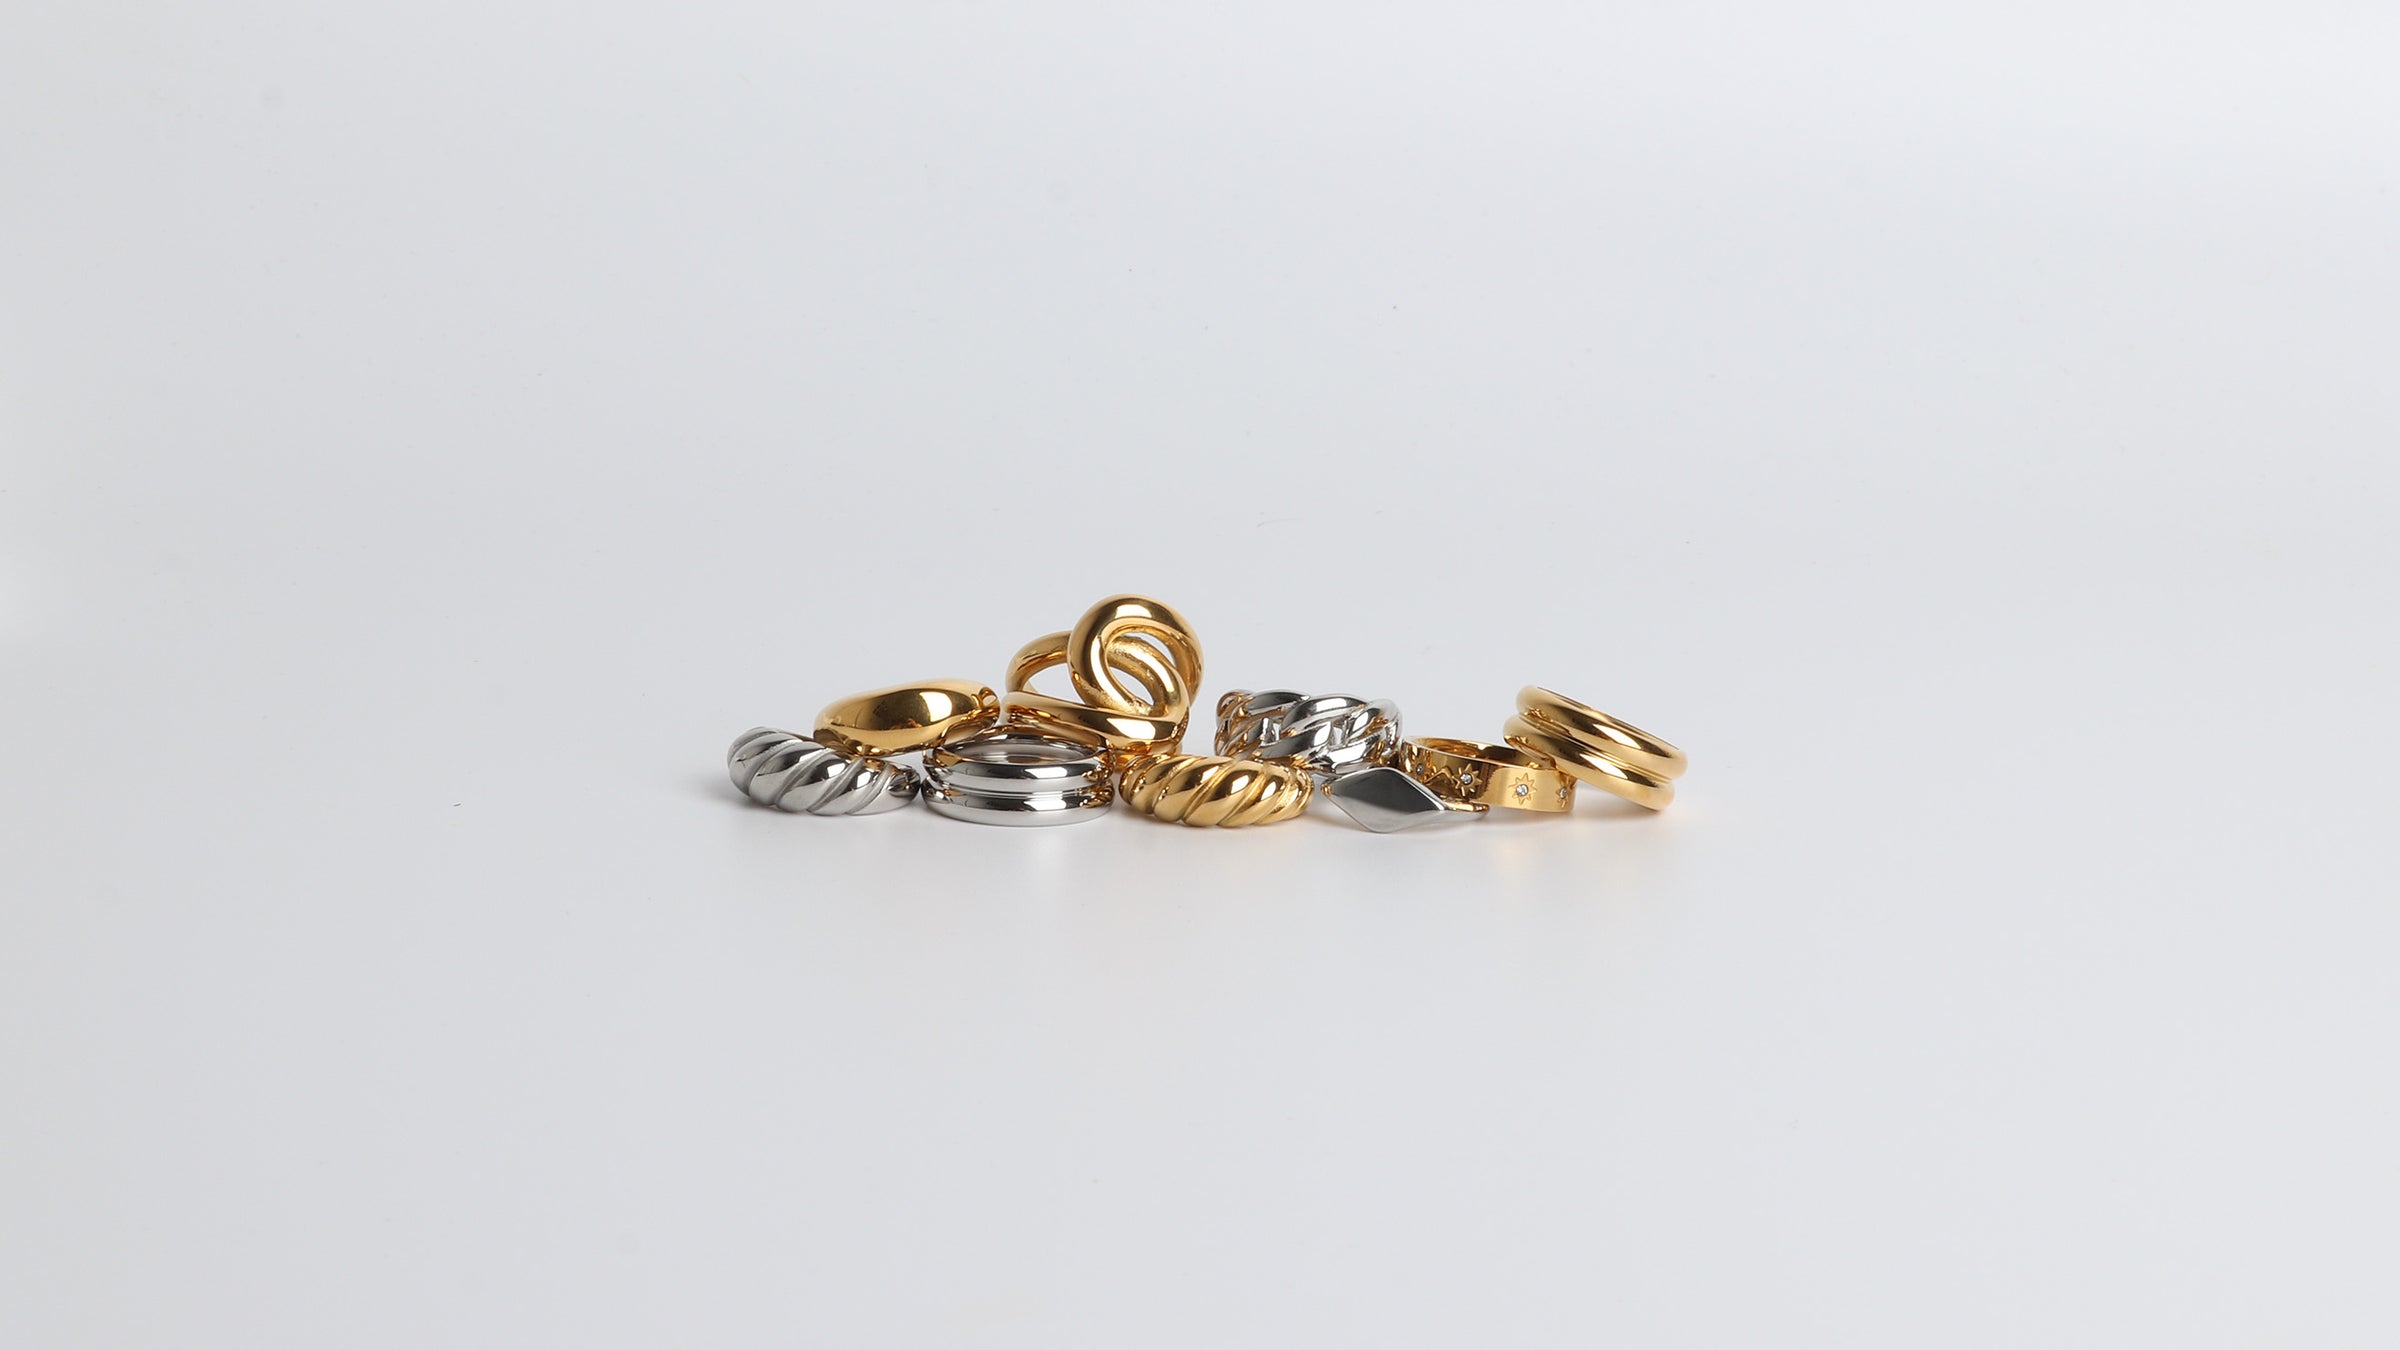 Stack of MARRIN COSTELLO JEWELRY rings, mix metals, showcasing all the different styles of MC rings, from dainty to statement rings. Available in 14k gold plated stainless steel, and polished stainless steel.